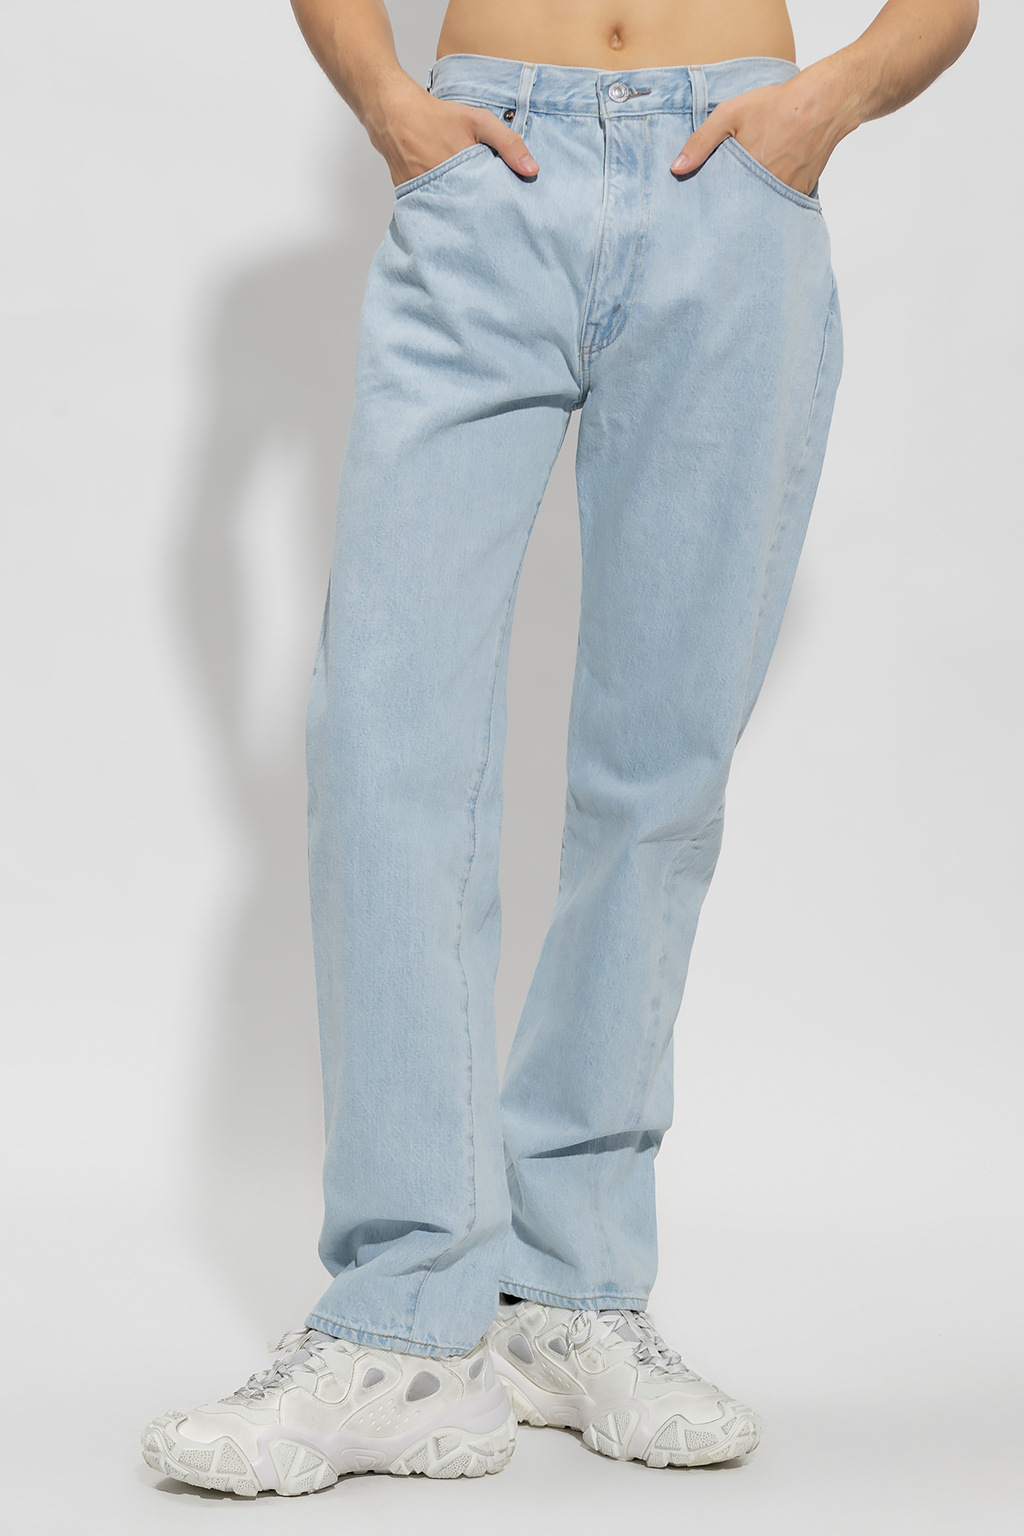 Levi's The 'Vintage Clothing®' collection jeans | Men's Clothing | Vitkac